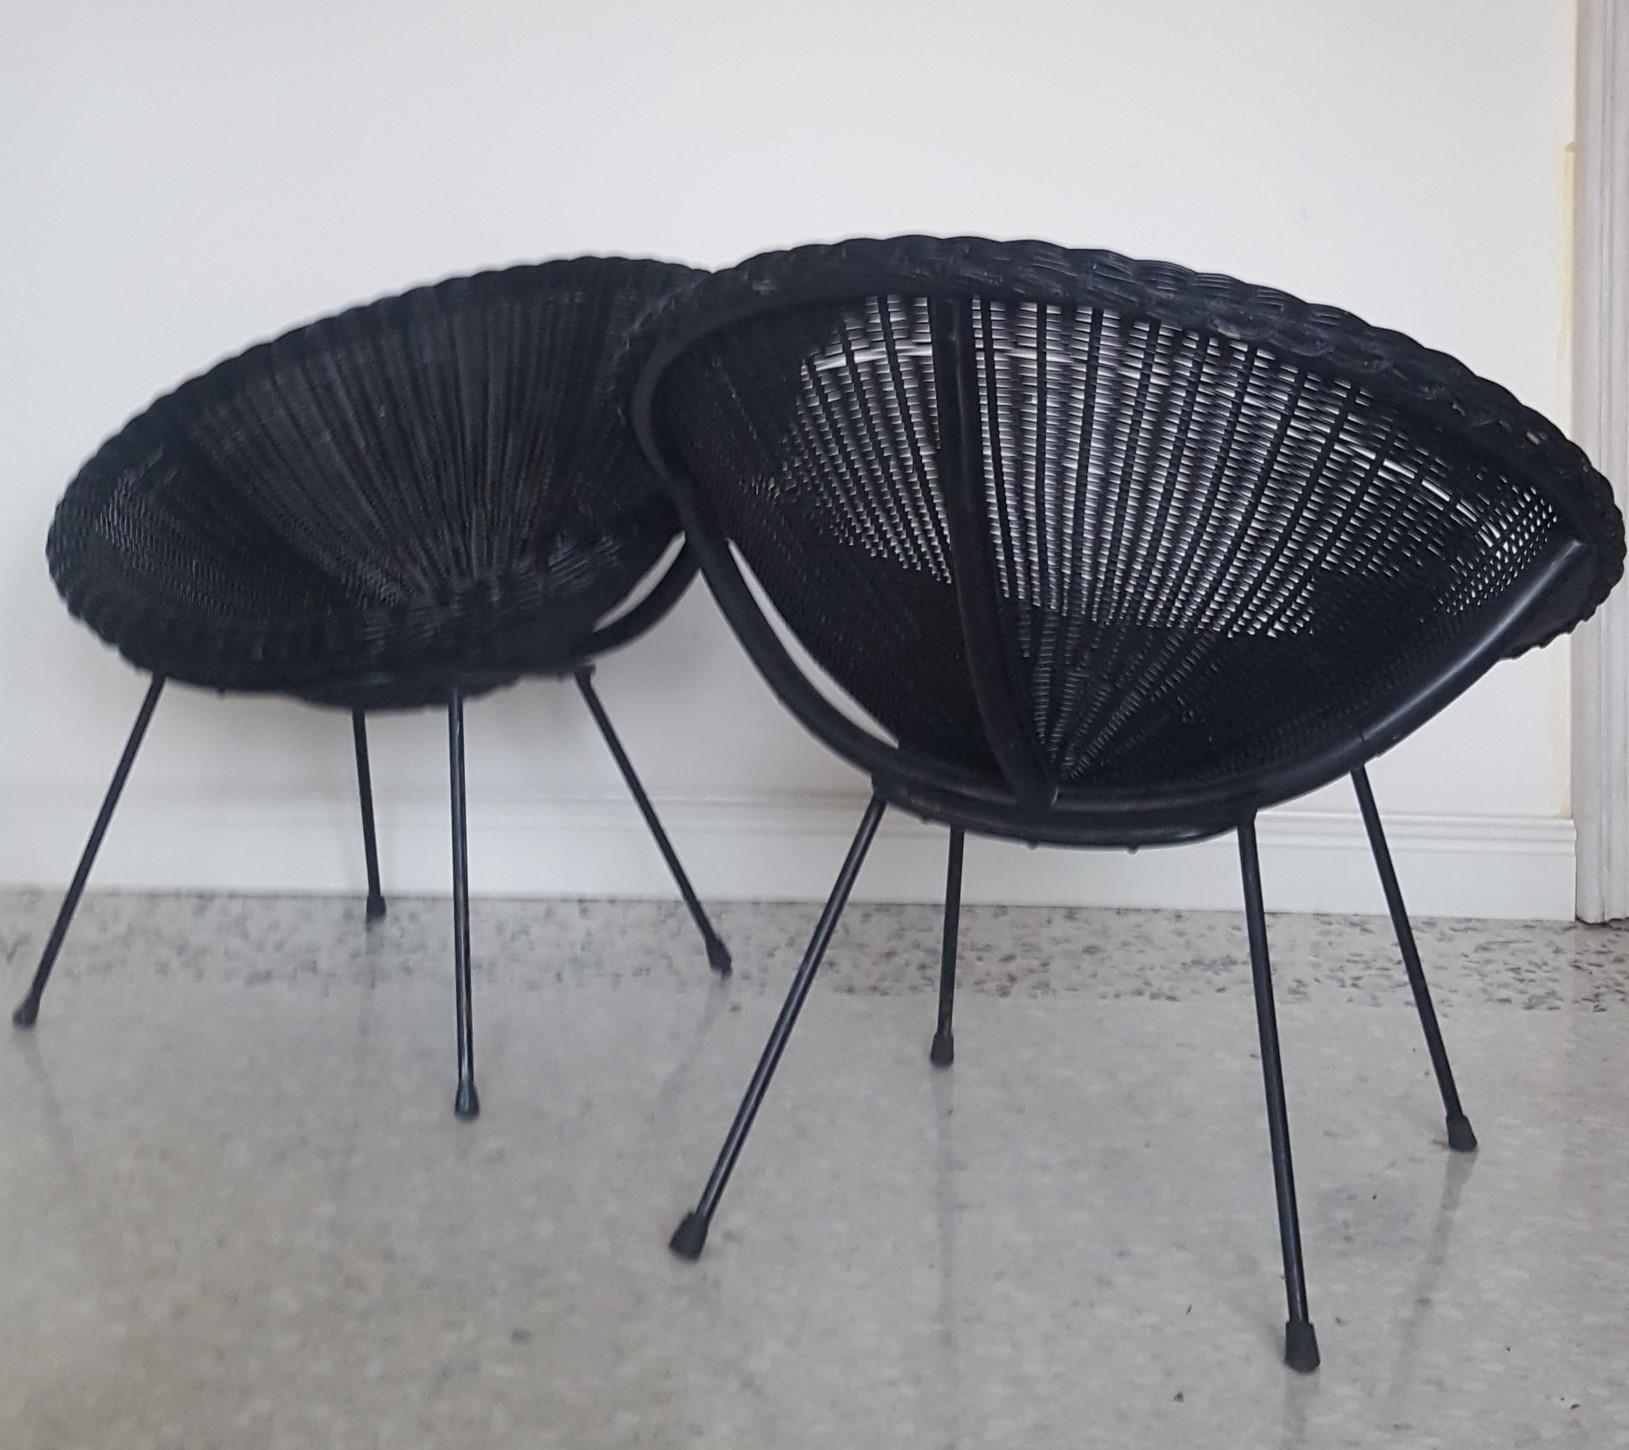 Mid-Century Modern Italian Black Wicker Round Armchairs, Made in Milano, 1950s For Sale 1